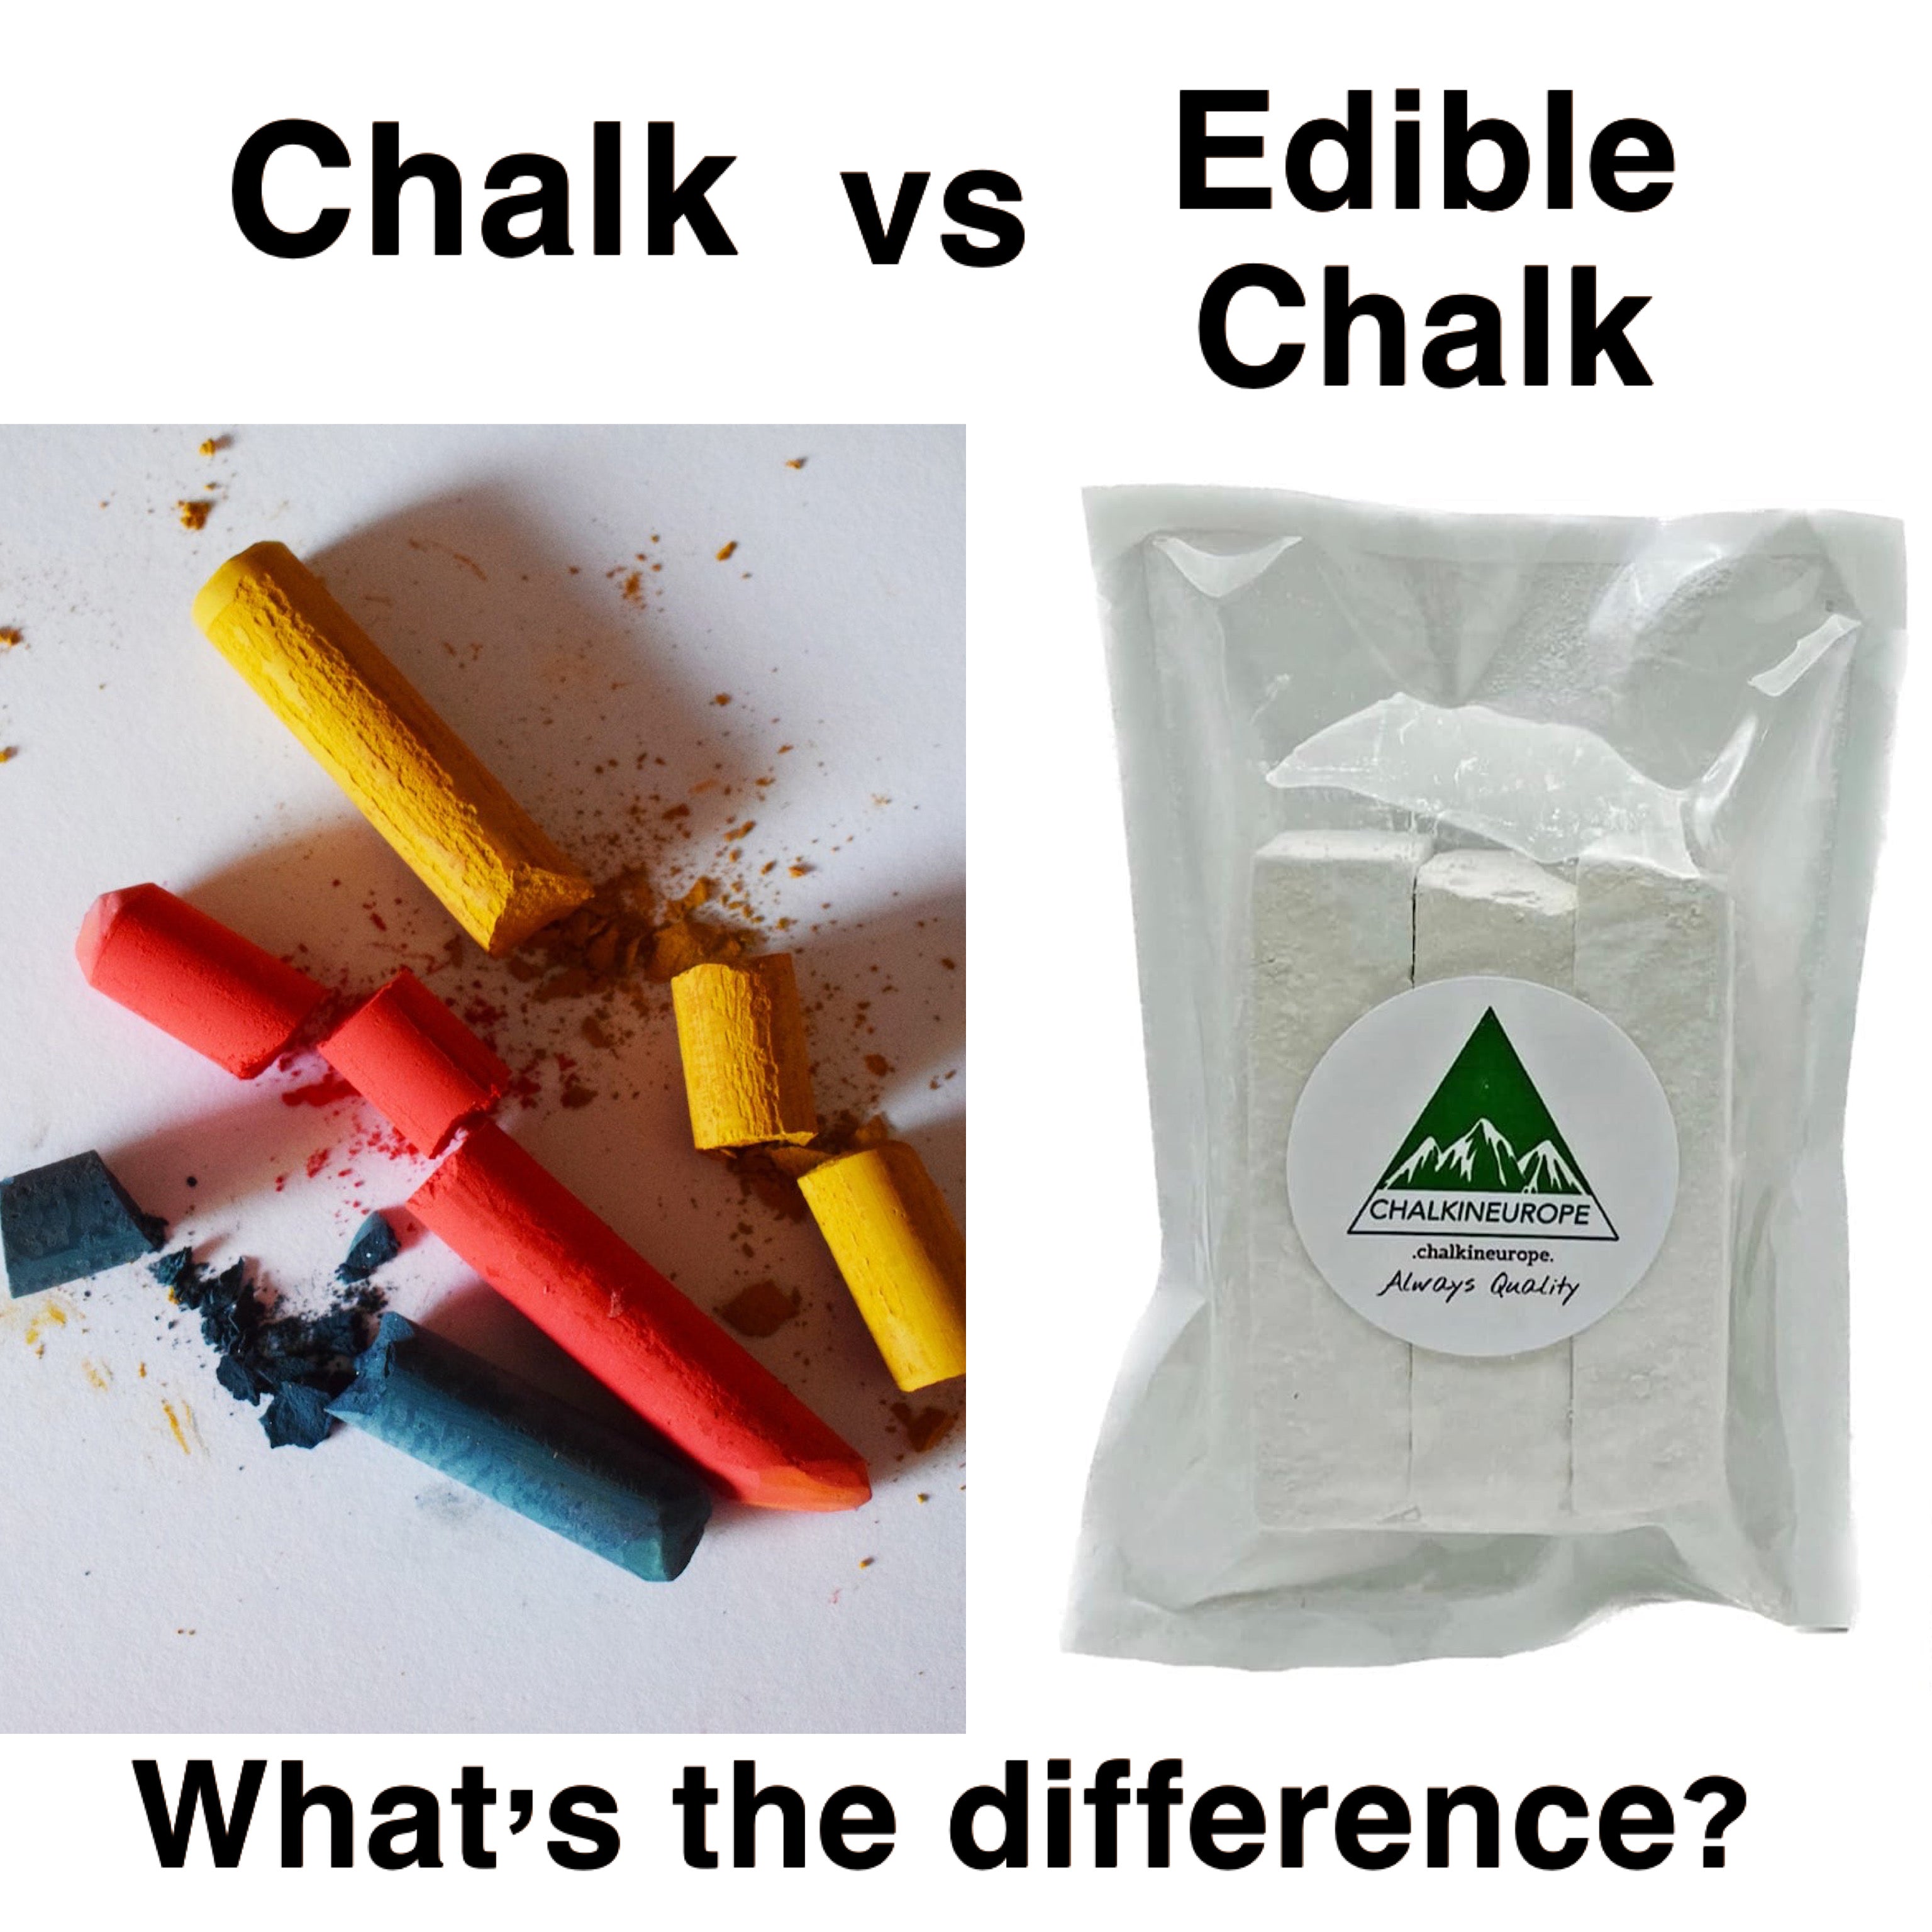 What is the difference between chalk and edible chalk?